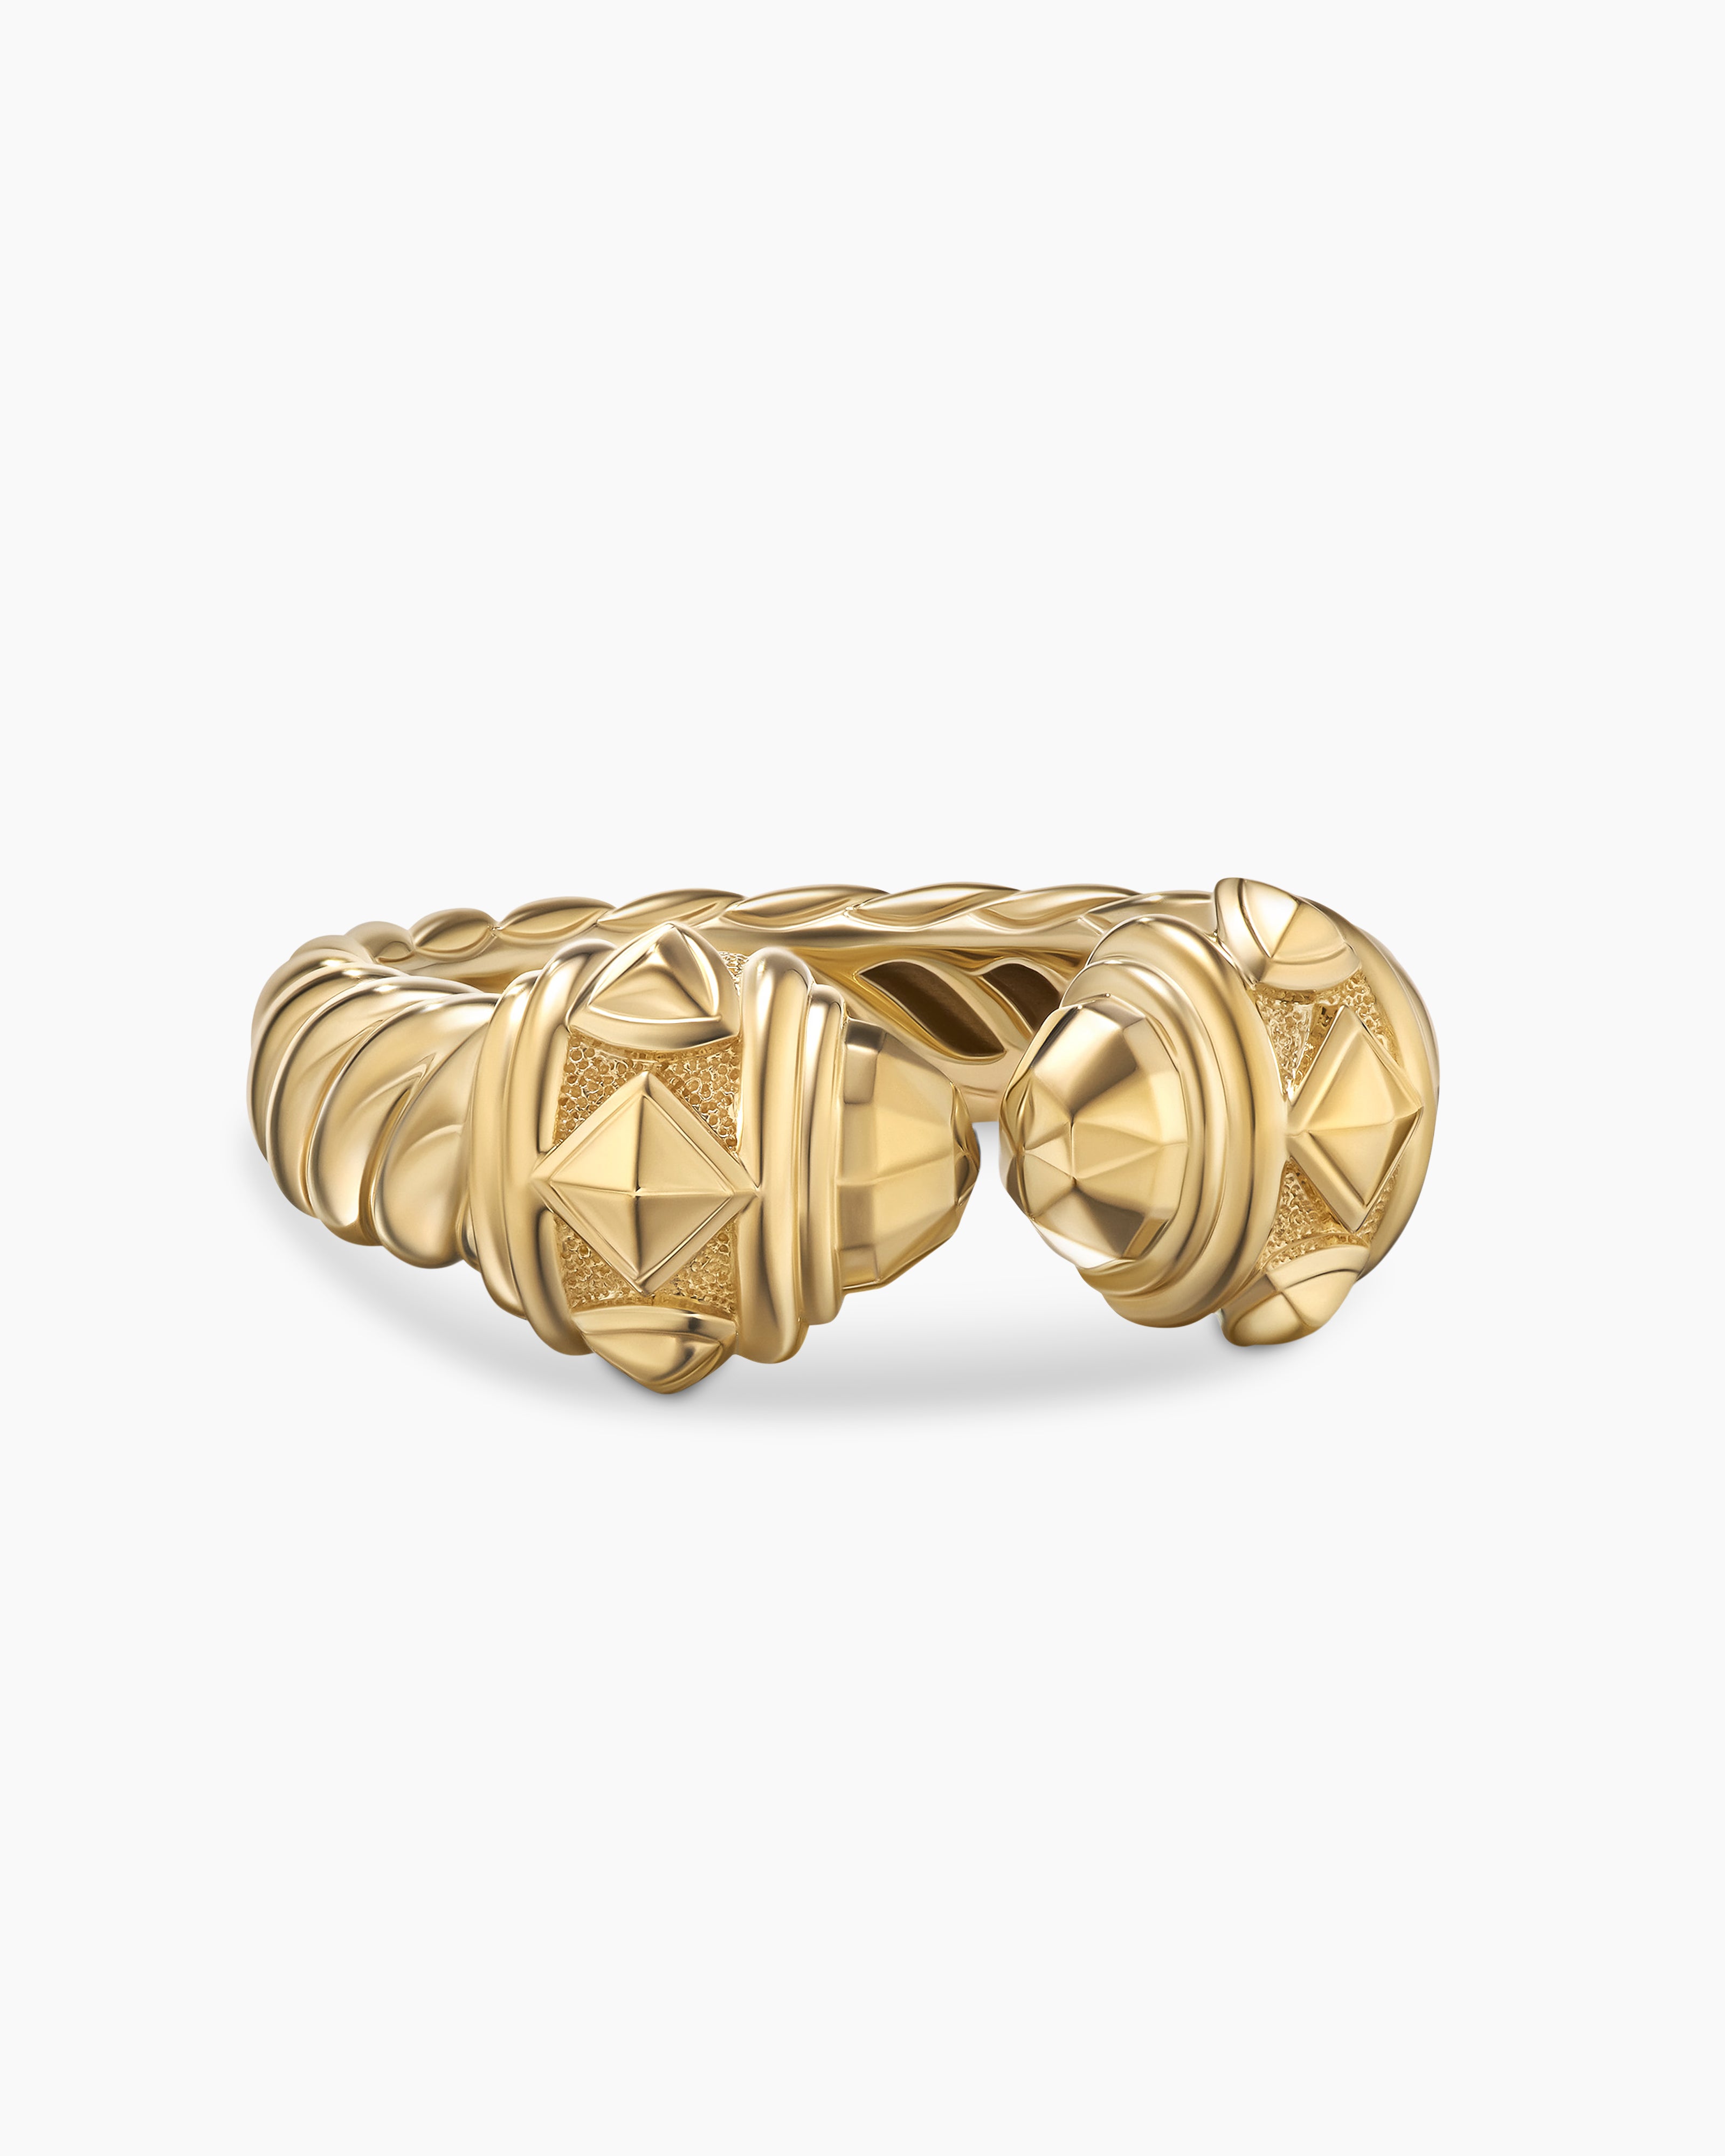 Renaissance Ring in 18K Yellow Gold, 6.5mm